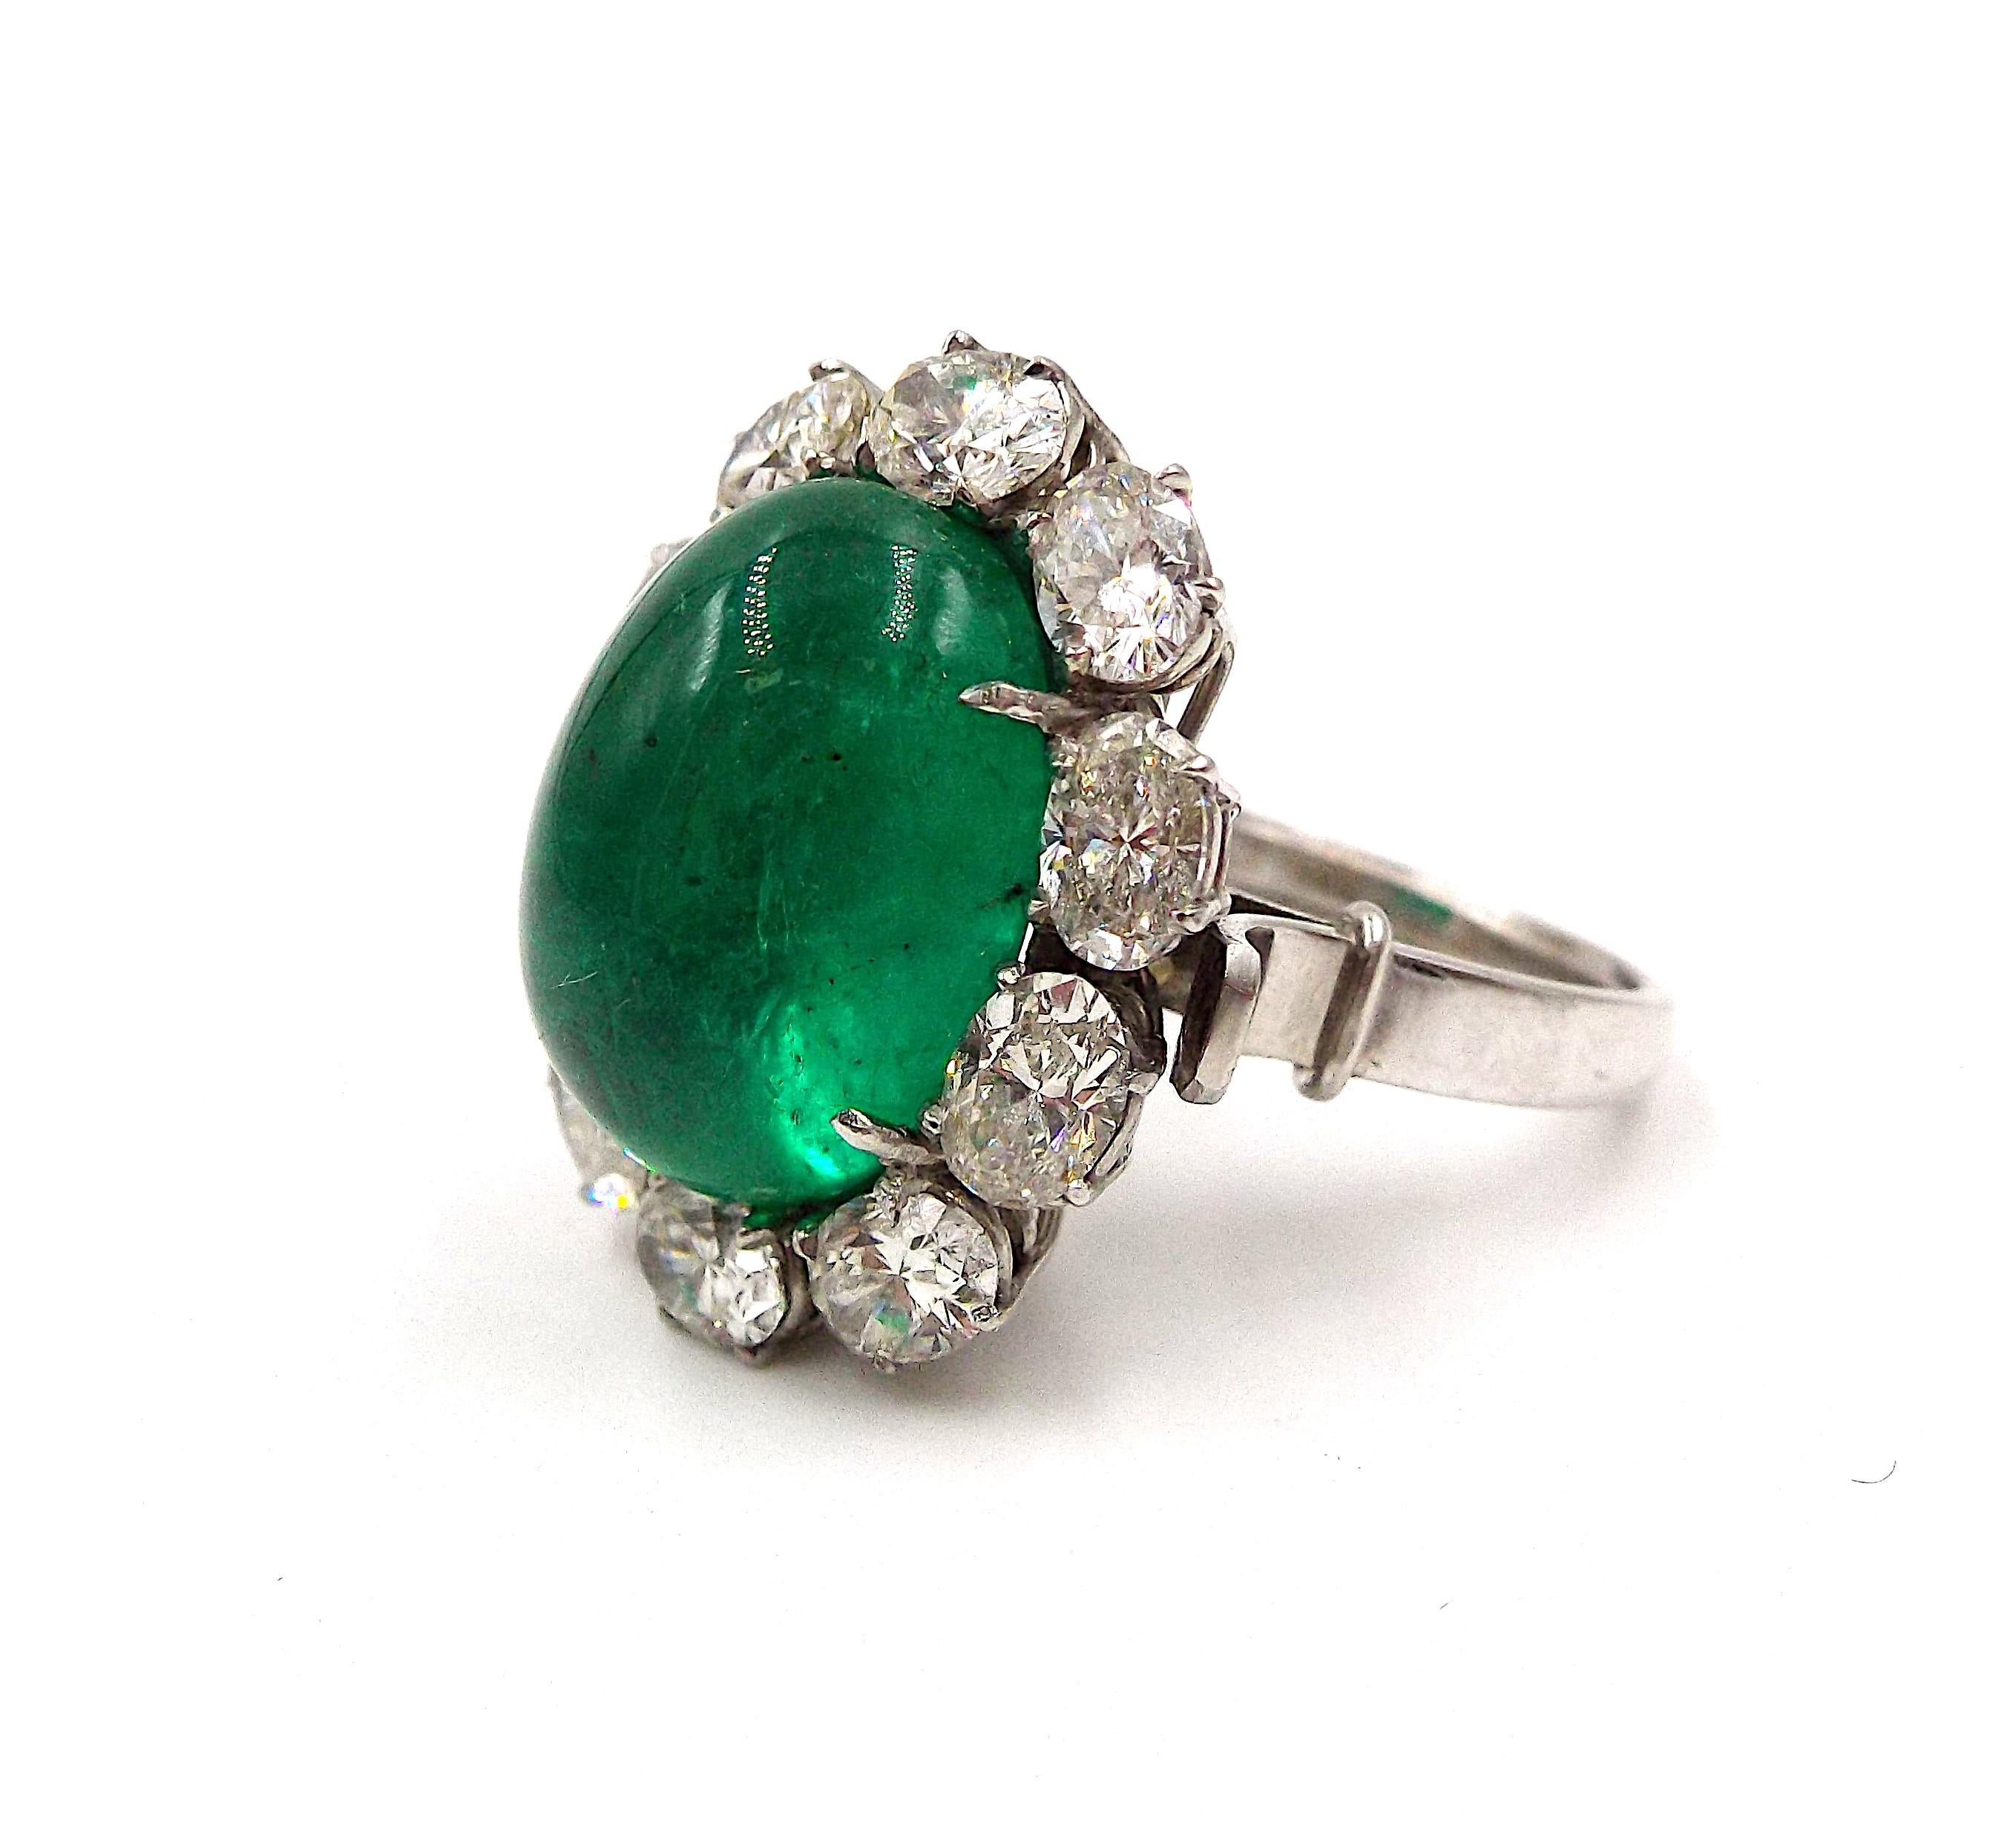 An elegant ring featuring a cabochon emerald weighing 11.88ct, surrounded by oval diamonds approx. 3ct in total. Ring US size 4.75, sizeable (inner horseshoe). Weight 12.7 grams.